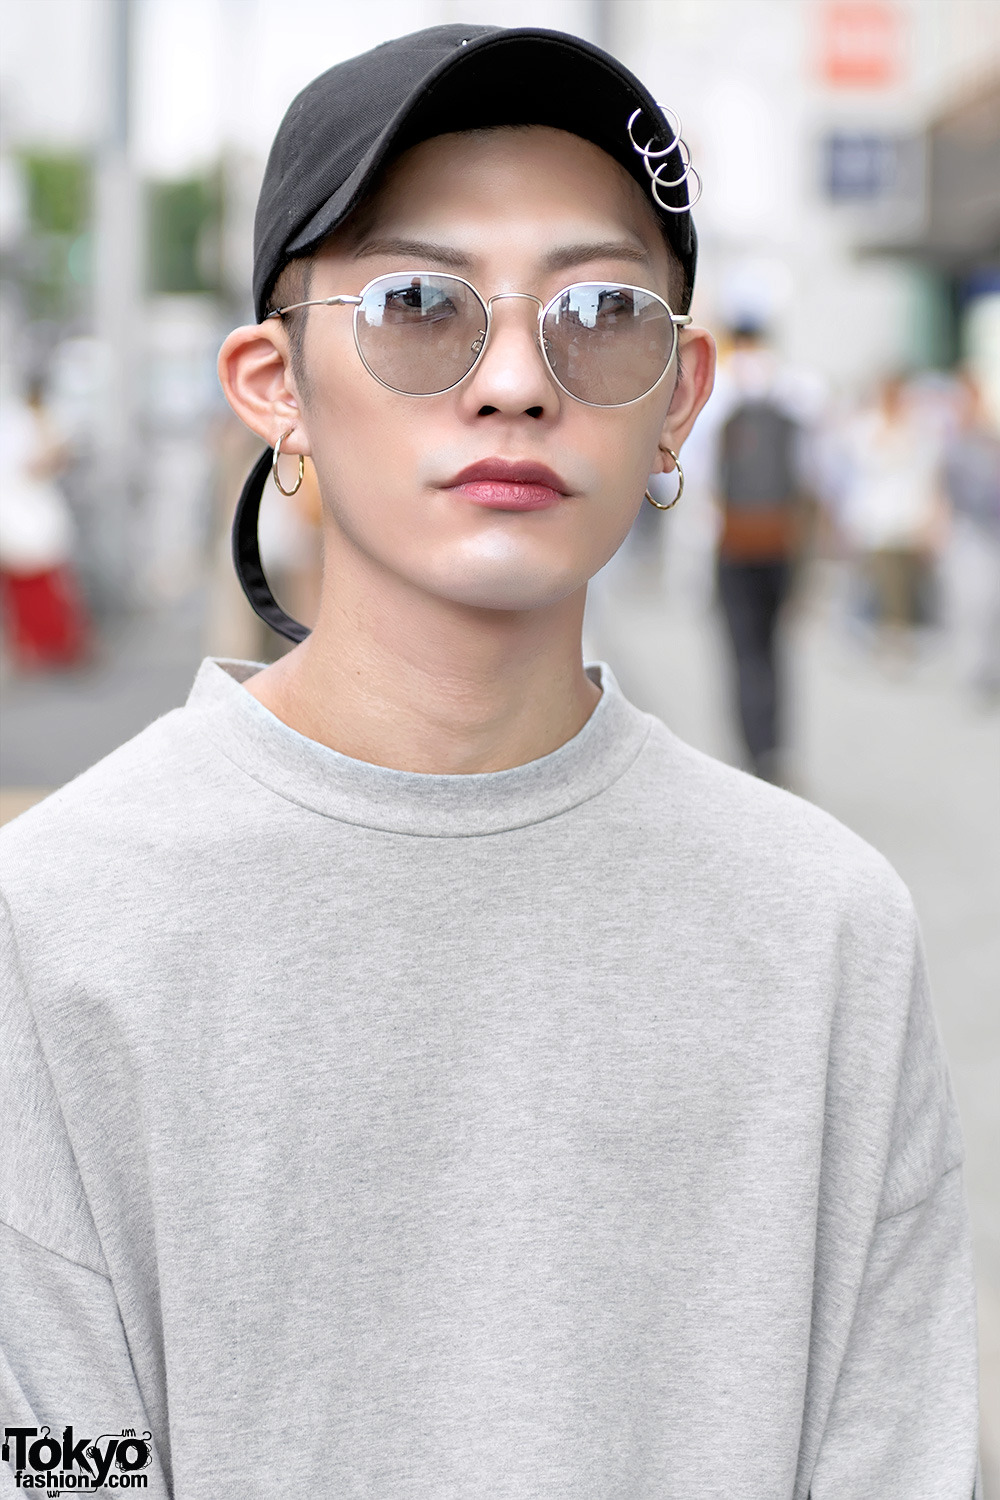 tokyo-fashion:  Sench1 and Cham on the street in Harajuku. Sench1 is wearing a Vetements